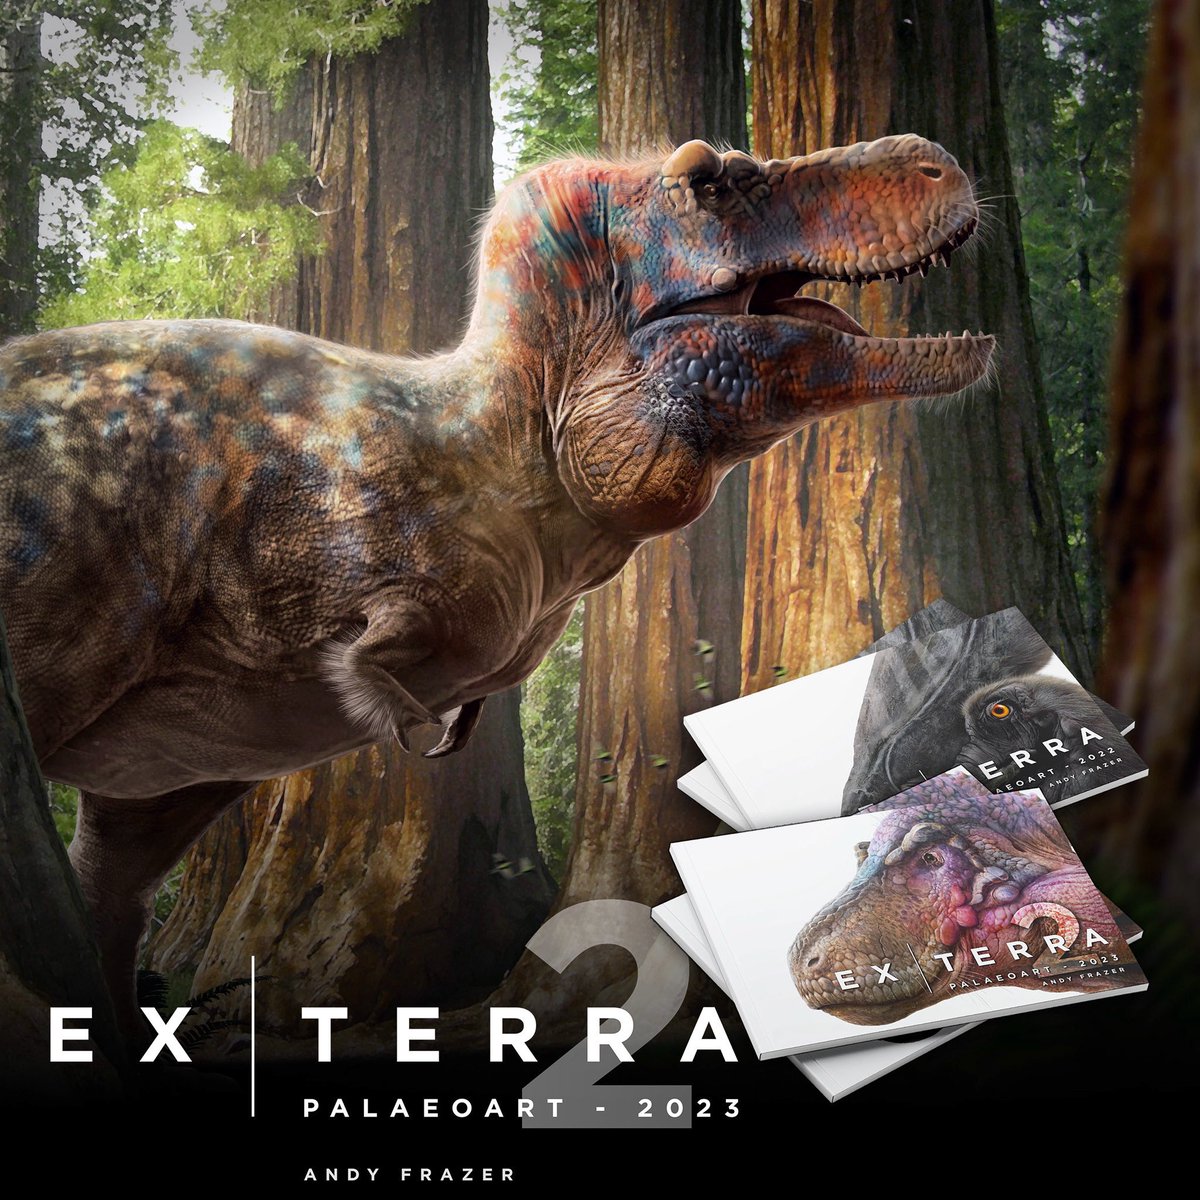 My latest collection of palaeoart, Ex|Terra 2 was published a couple of months ago. I have a few copies left - and some copies of Ex|Terra 1 too. All the info is in my pinned post and profile. 🦖